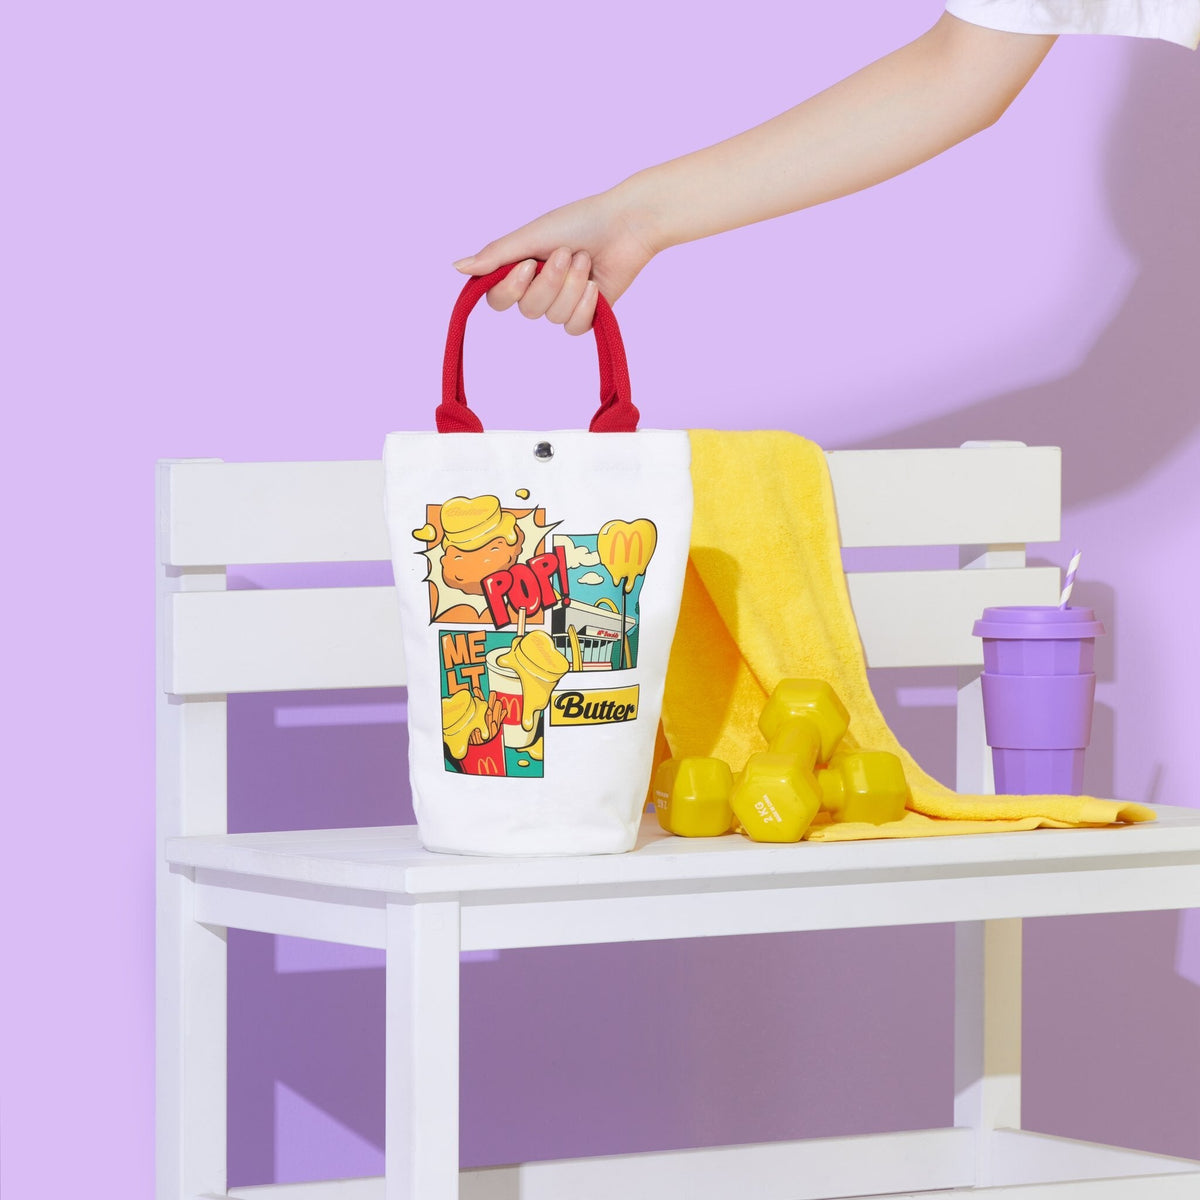 [BTS x McDonald’s] - WHITE MELTING TOTE WITH RED HANDLES